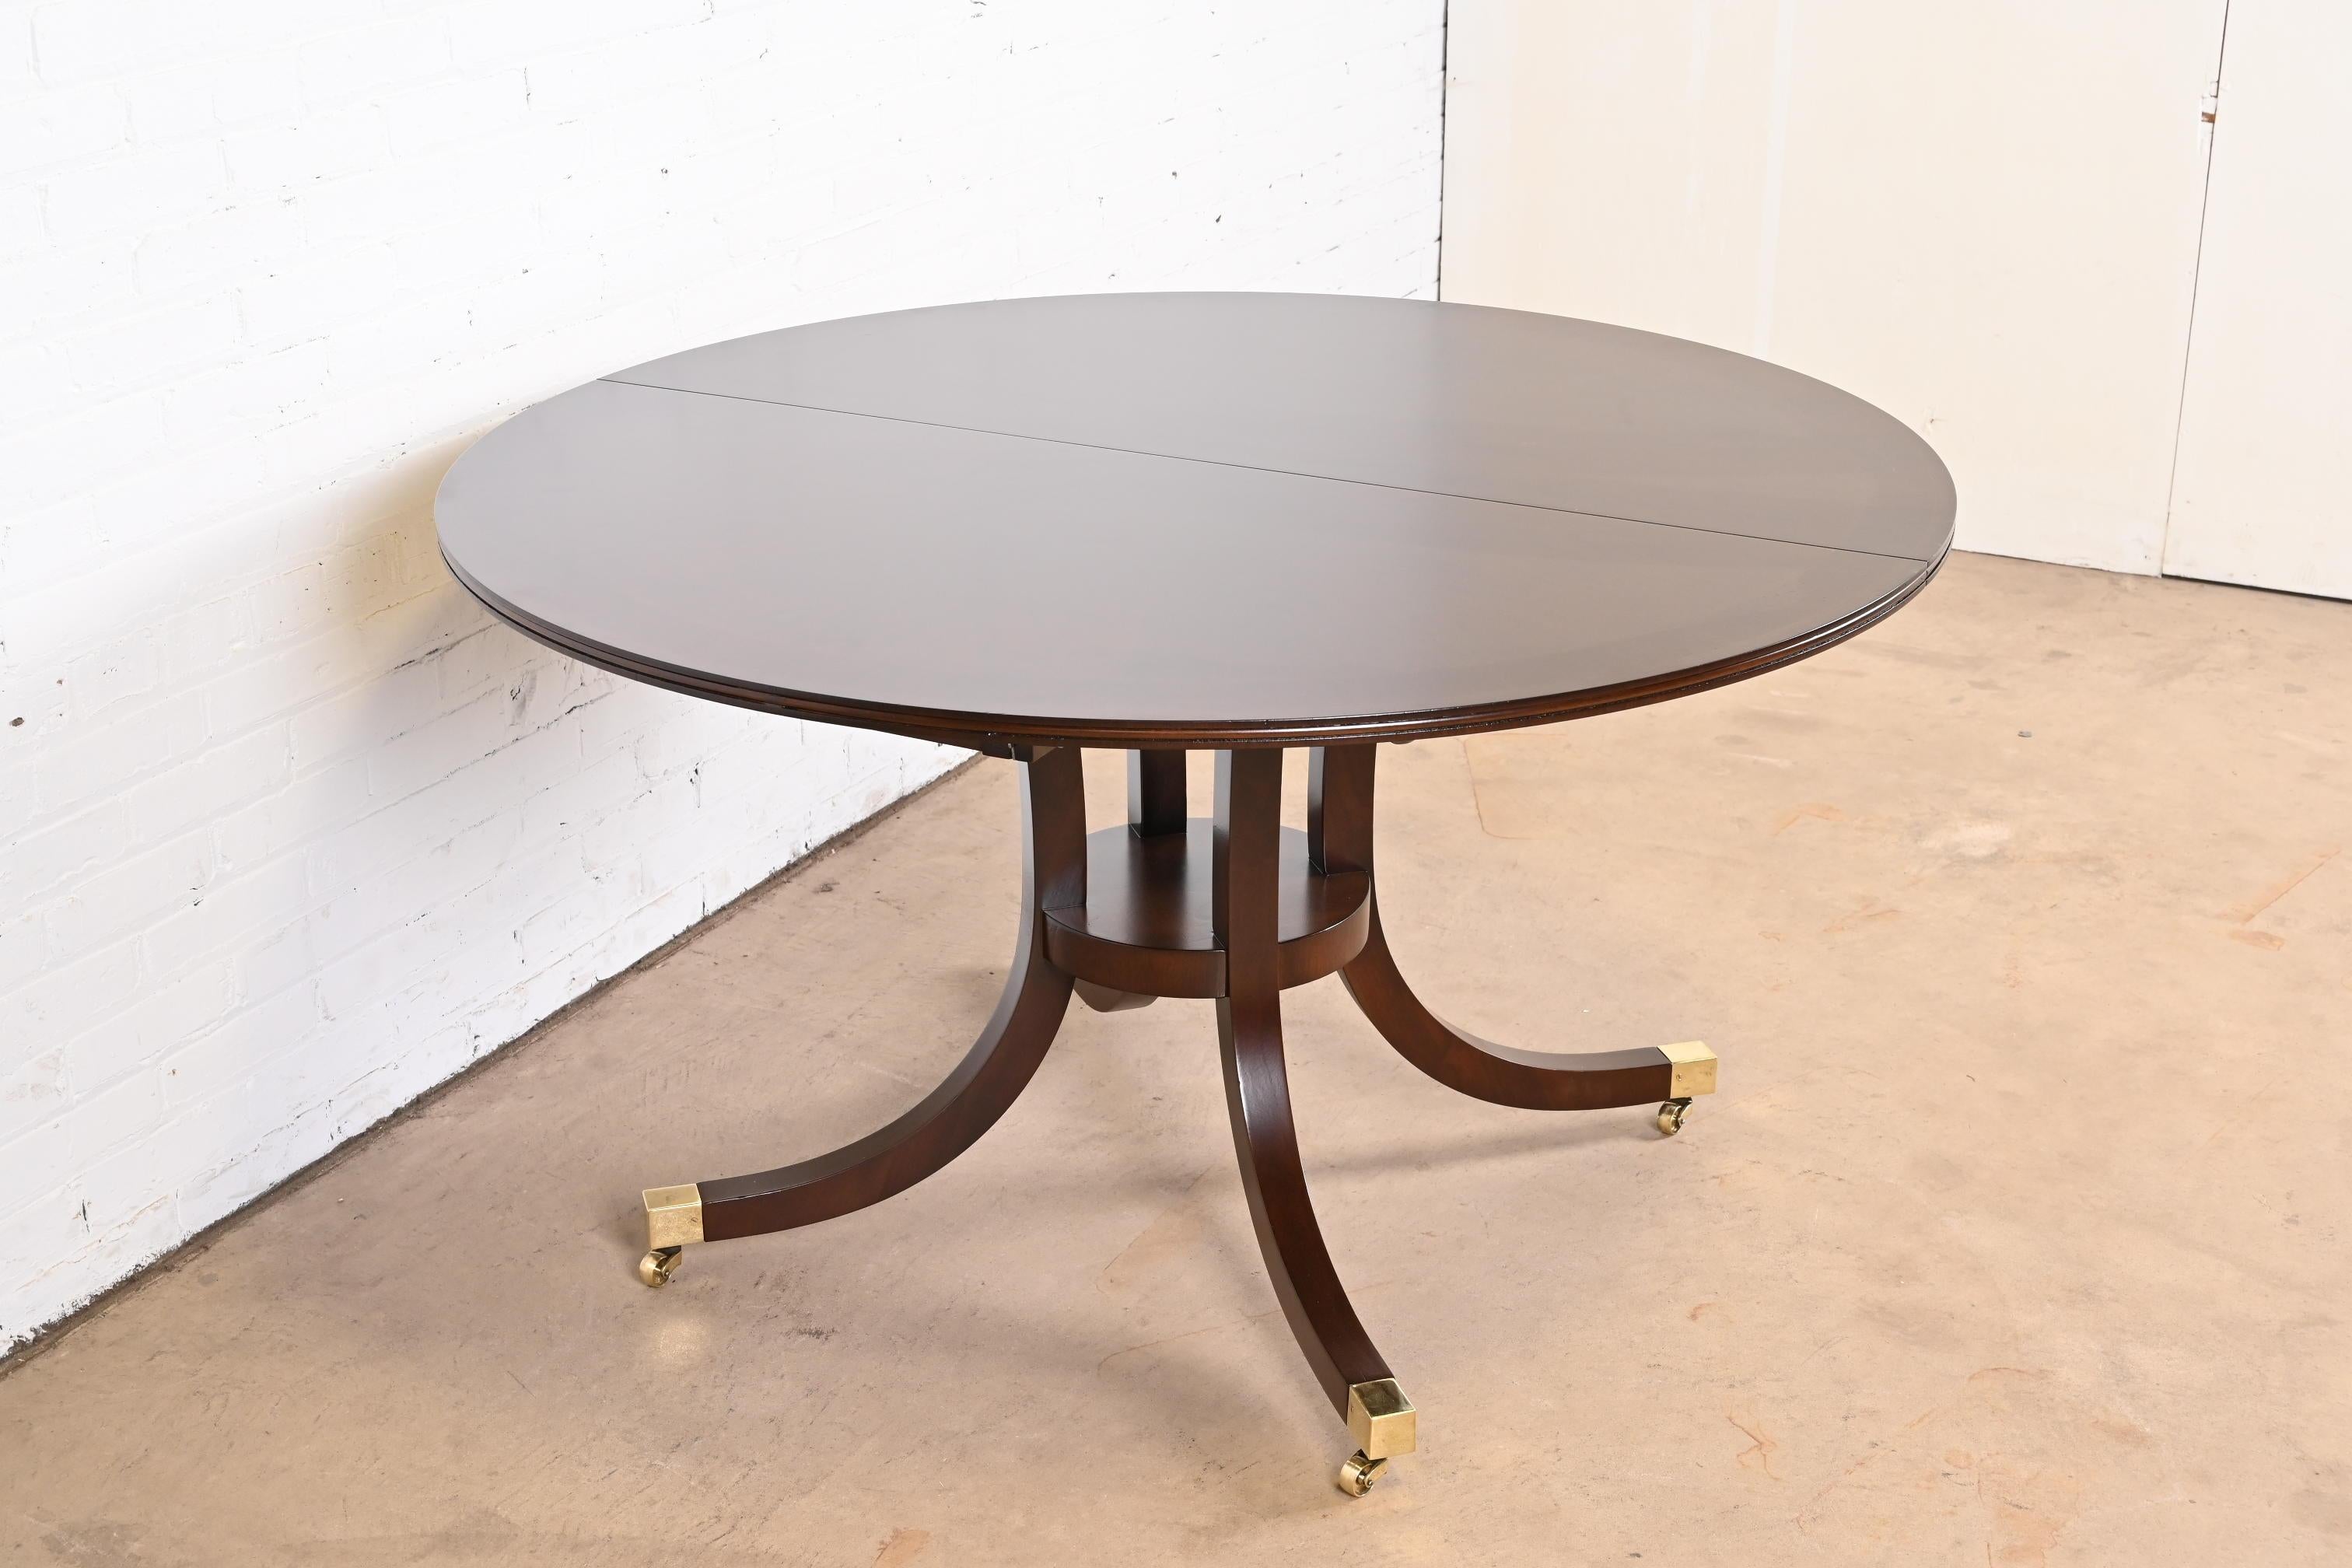 A beautiful Georgian or Regency style pedestal extension dining table

By Baker Furniture, 